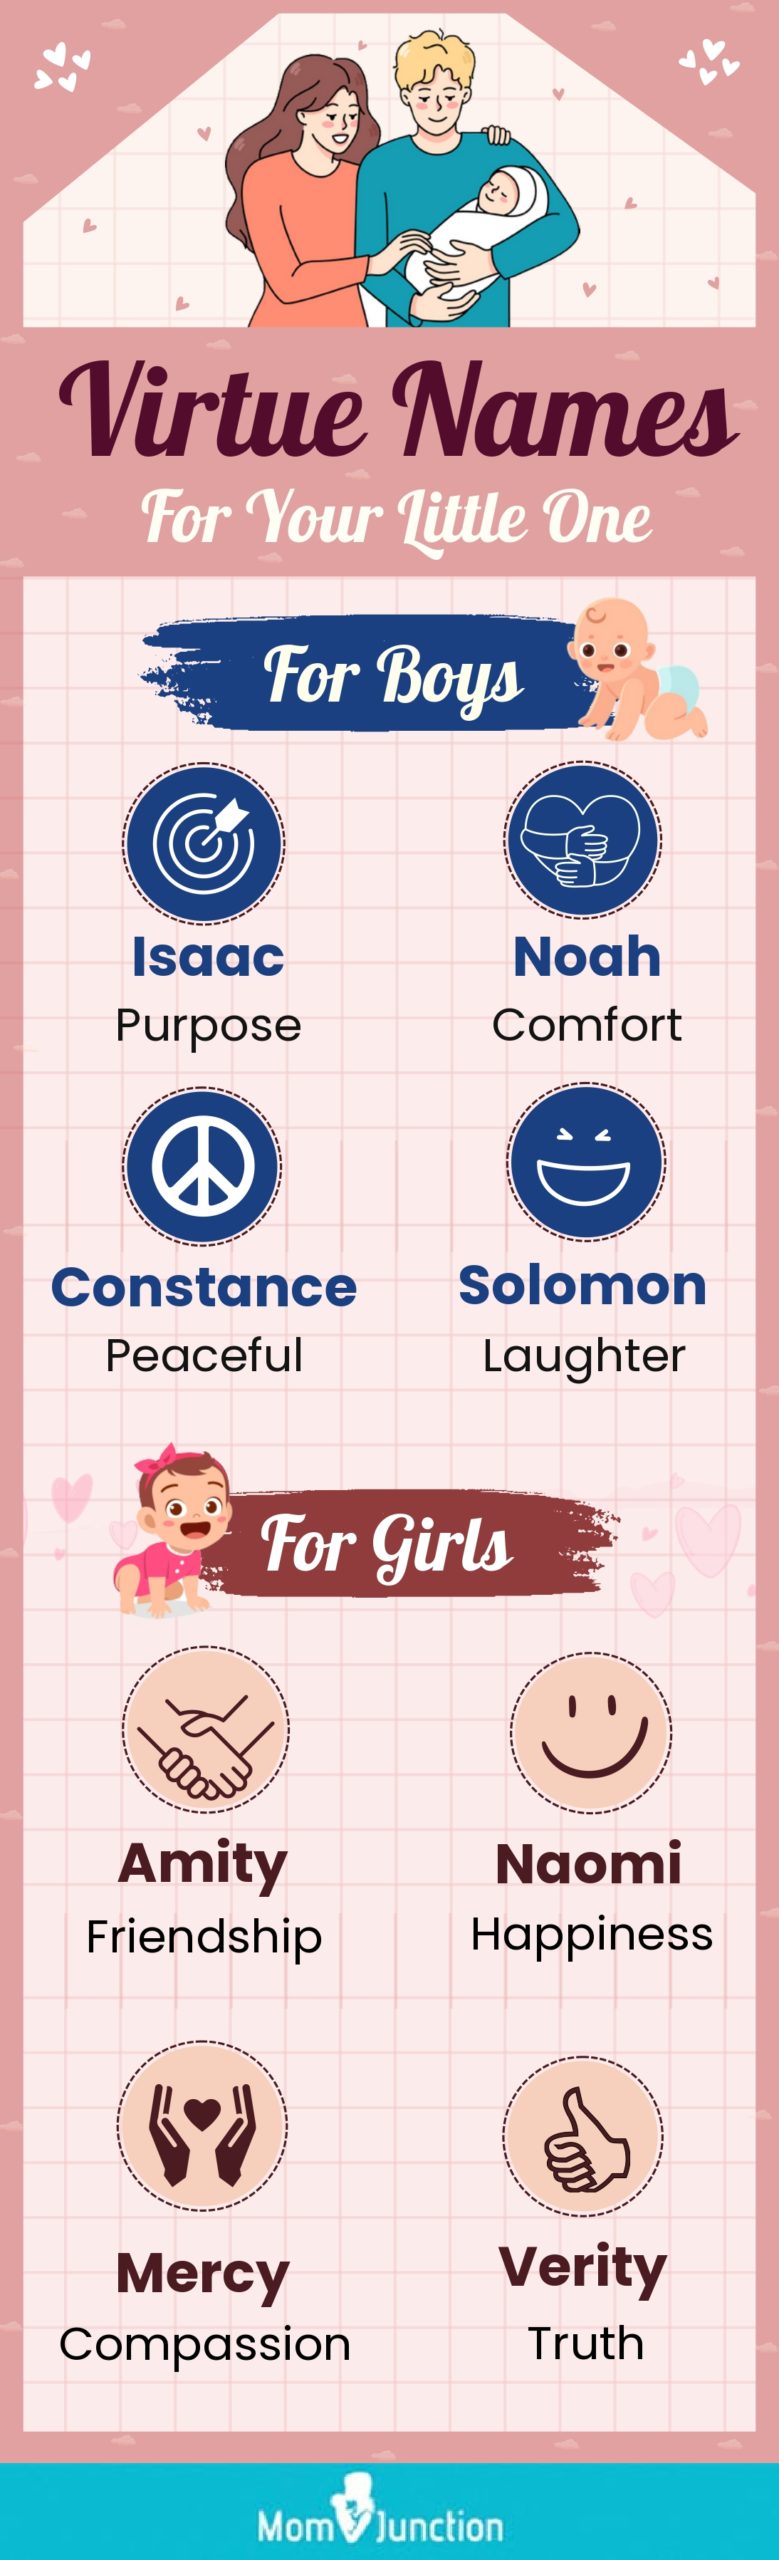 virtue names for your little one (infographic)